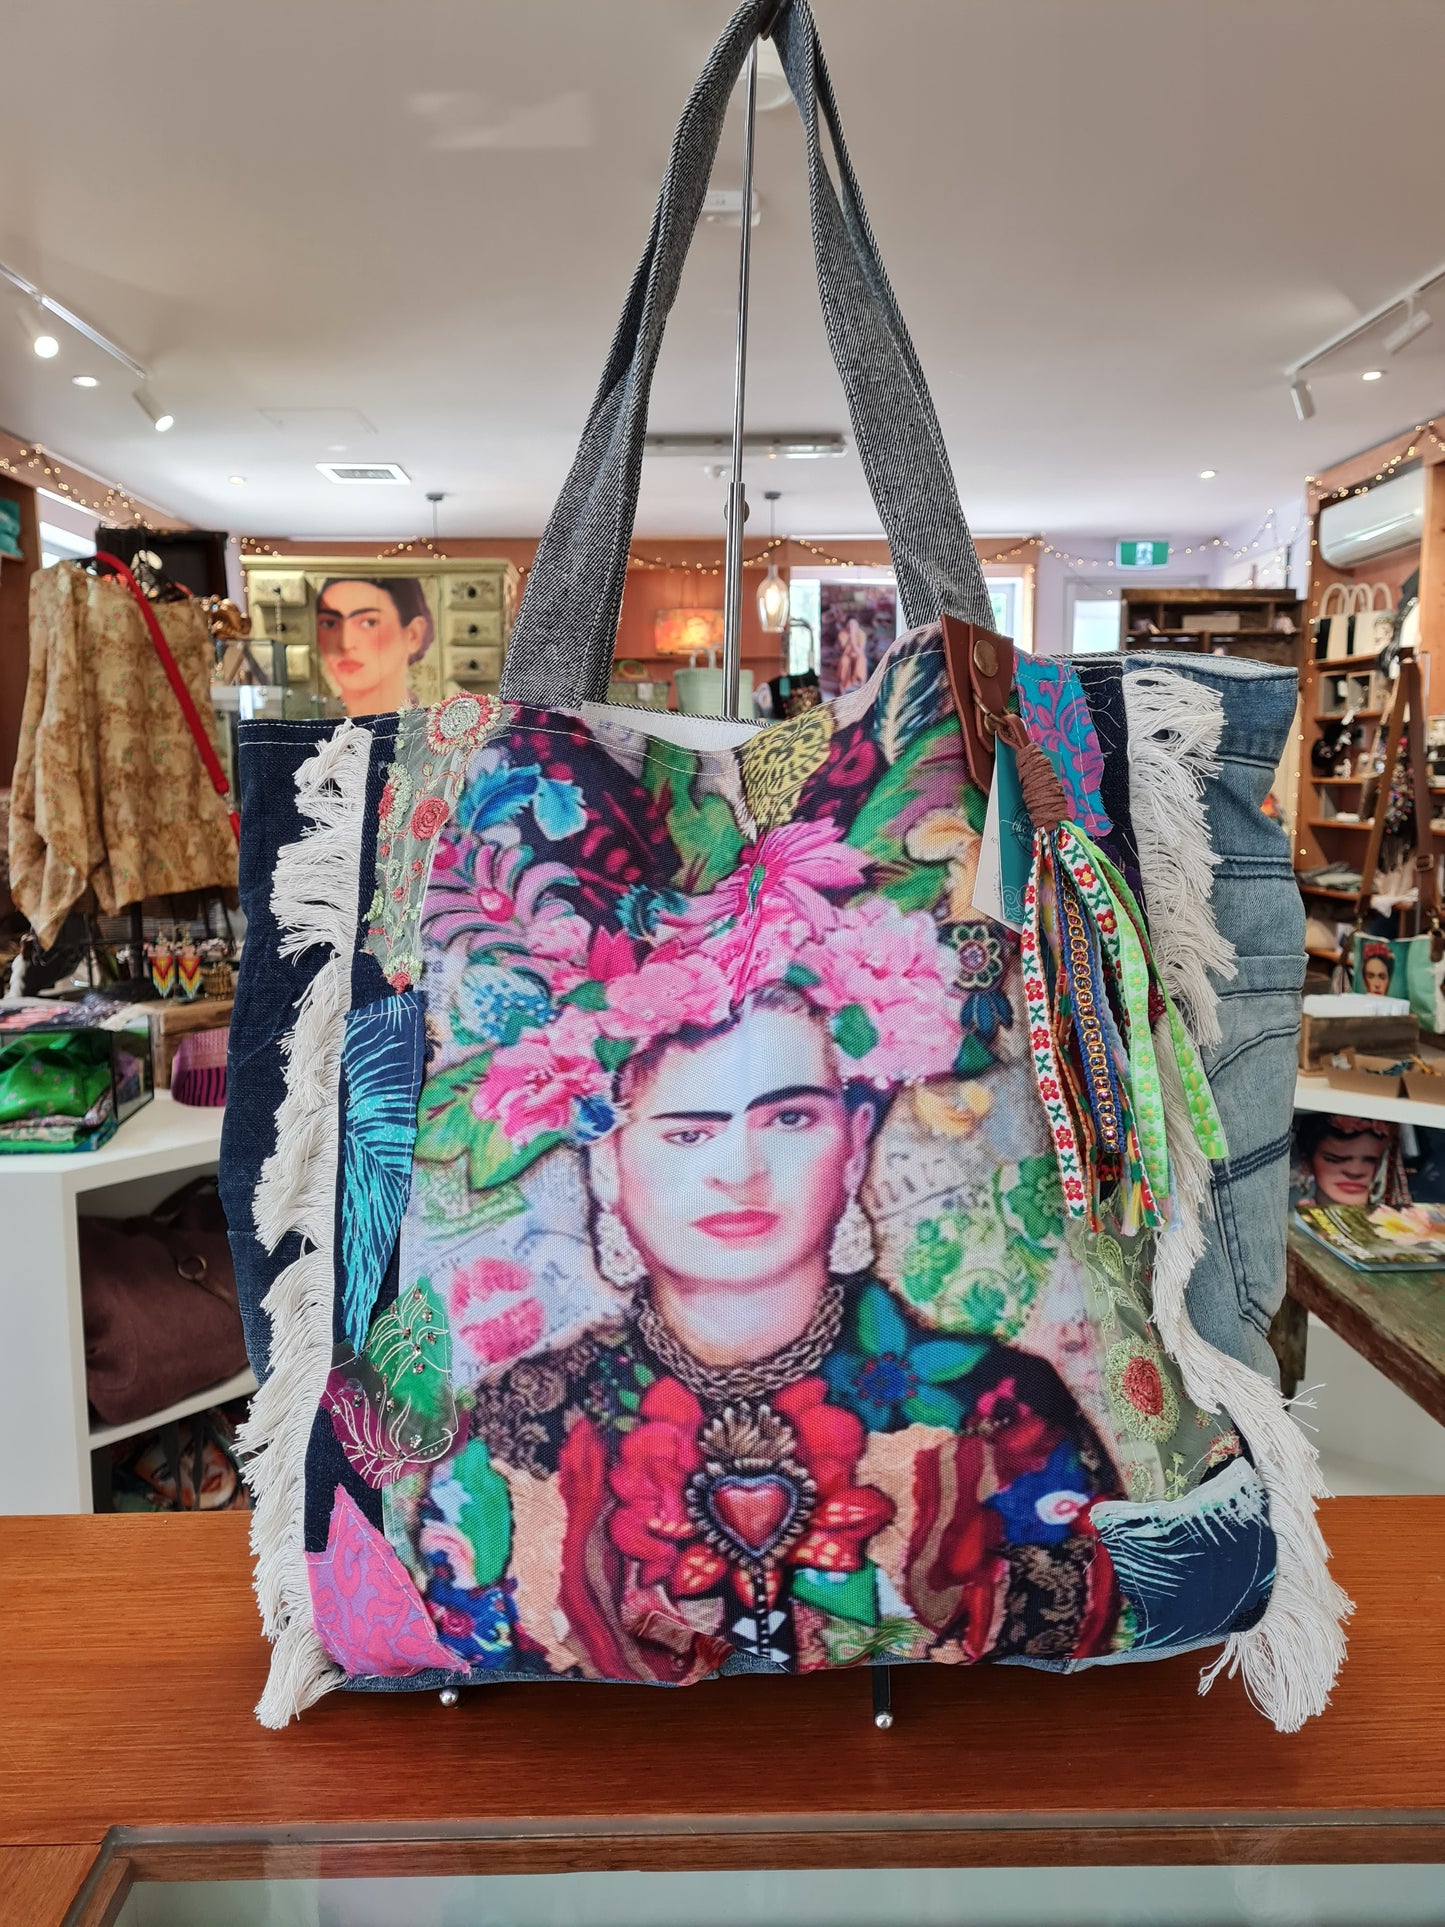 Frida Kahlo handmade, individual, recycled jeans bag. LUCKY LAST! Reduced to HALF PRICE!